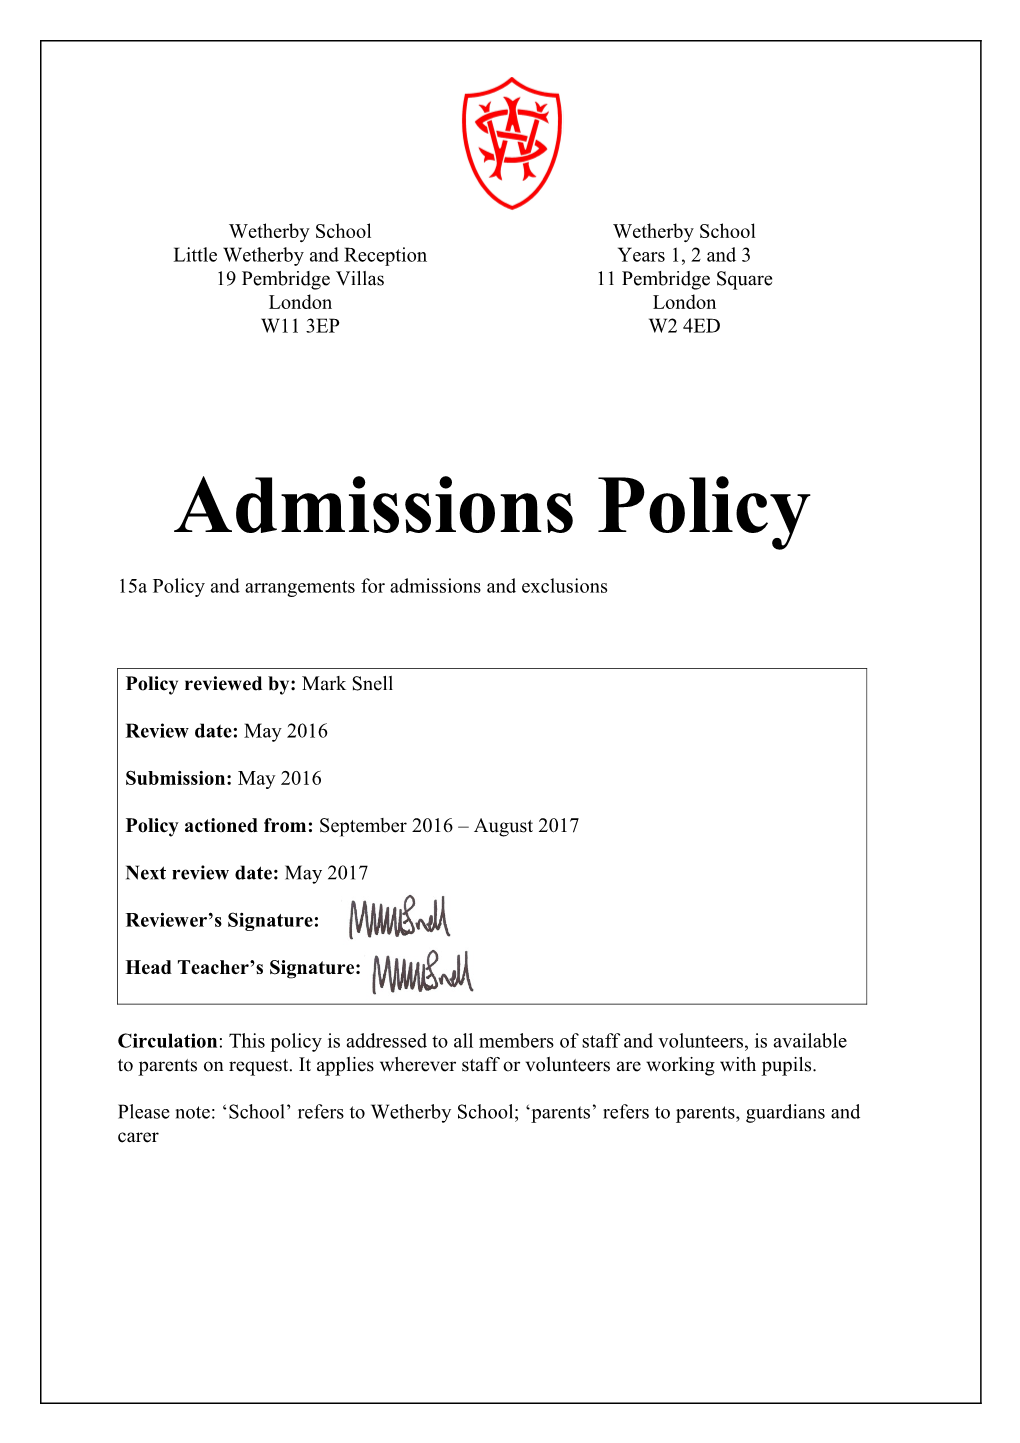 15A Policy and Arrangements for Admissionsand Exclusions